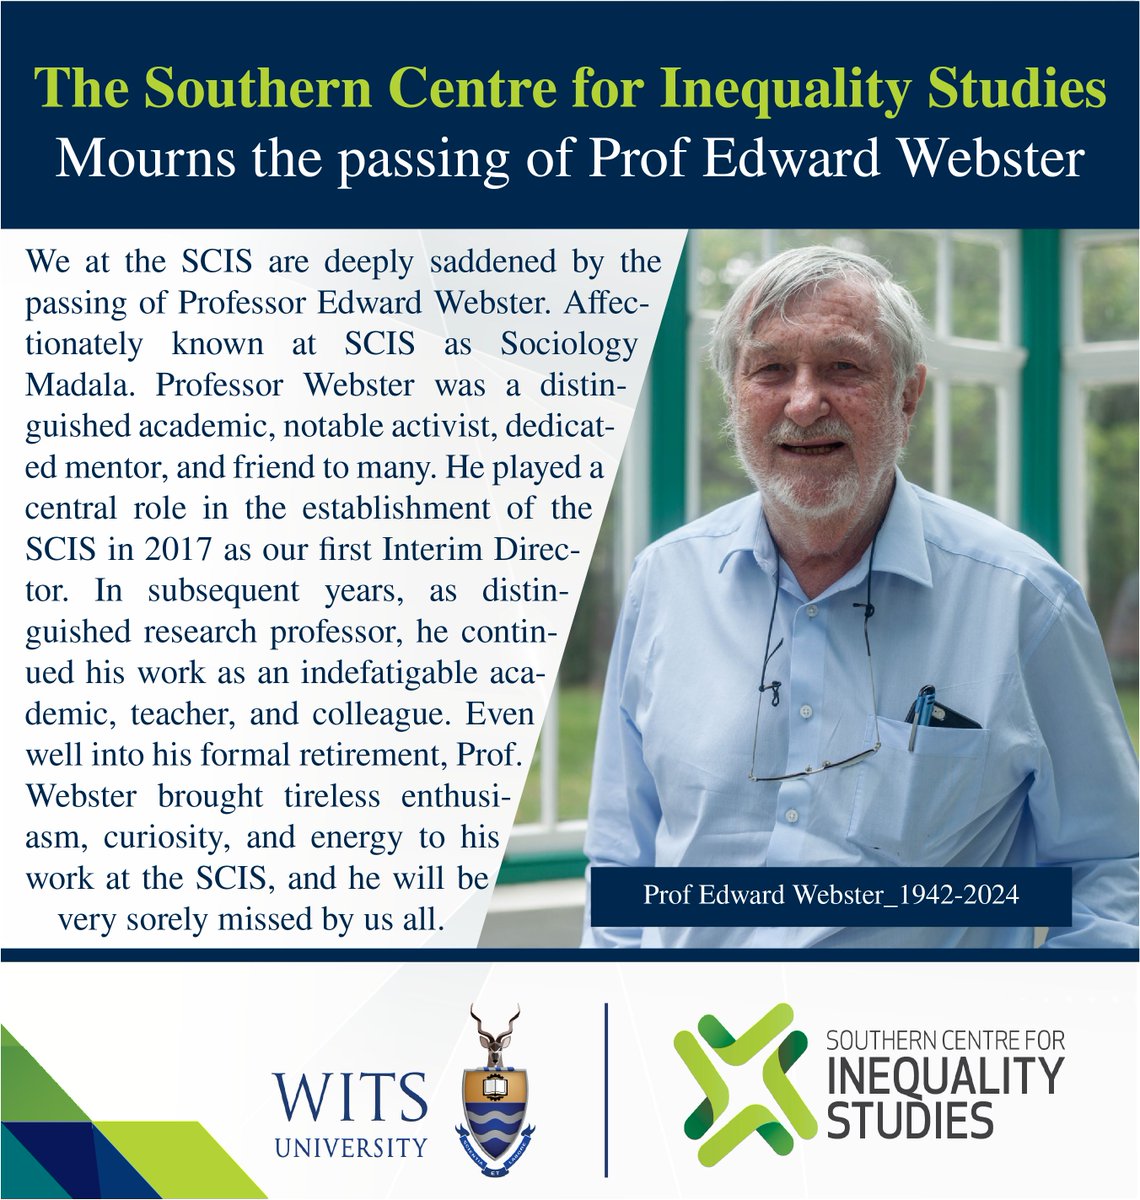 Southern Centre for Inequality Studies (@Wits_SCIS) on Twitter photo 2024-03-07 08:26:41